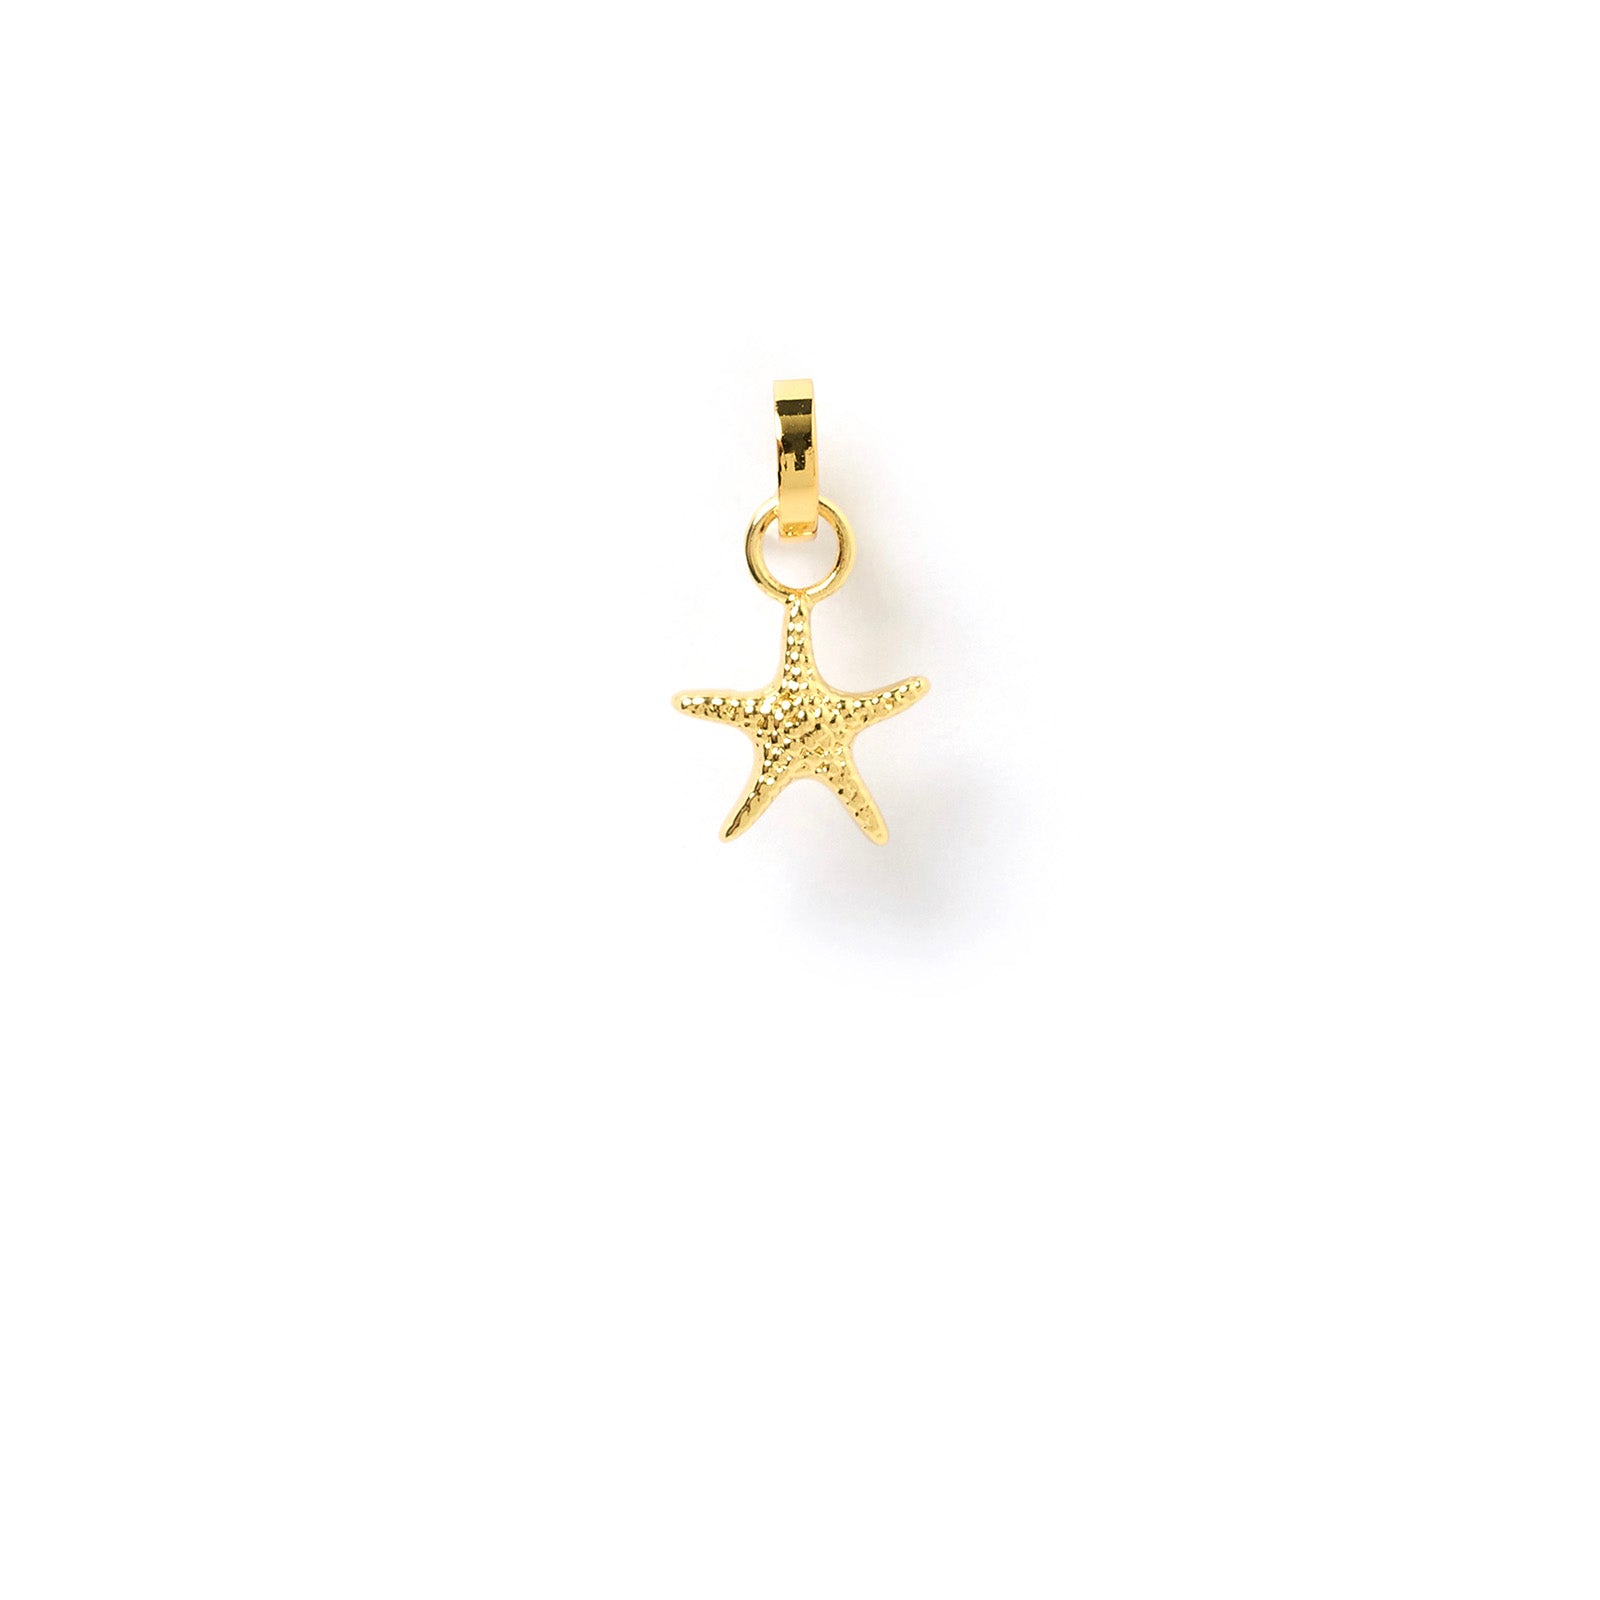 Arms Of Eve Sea Star gold starfish charm, adding touch of elegance to your jewelry collection